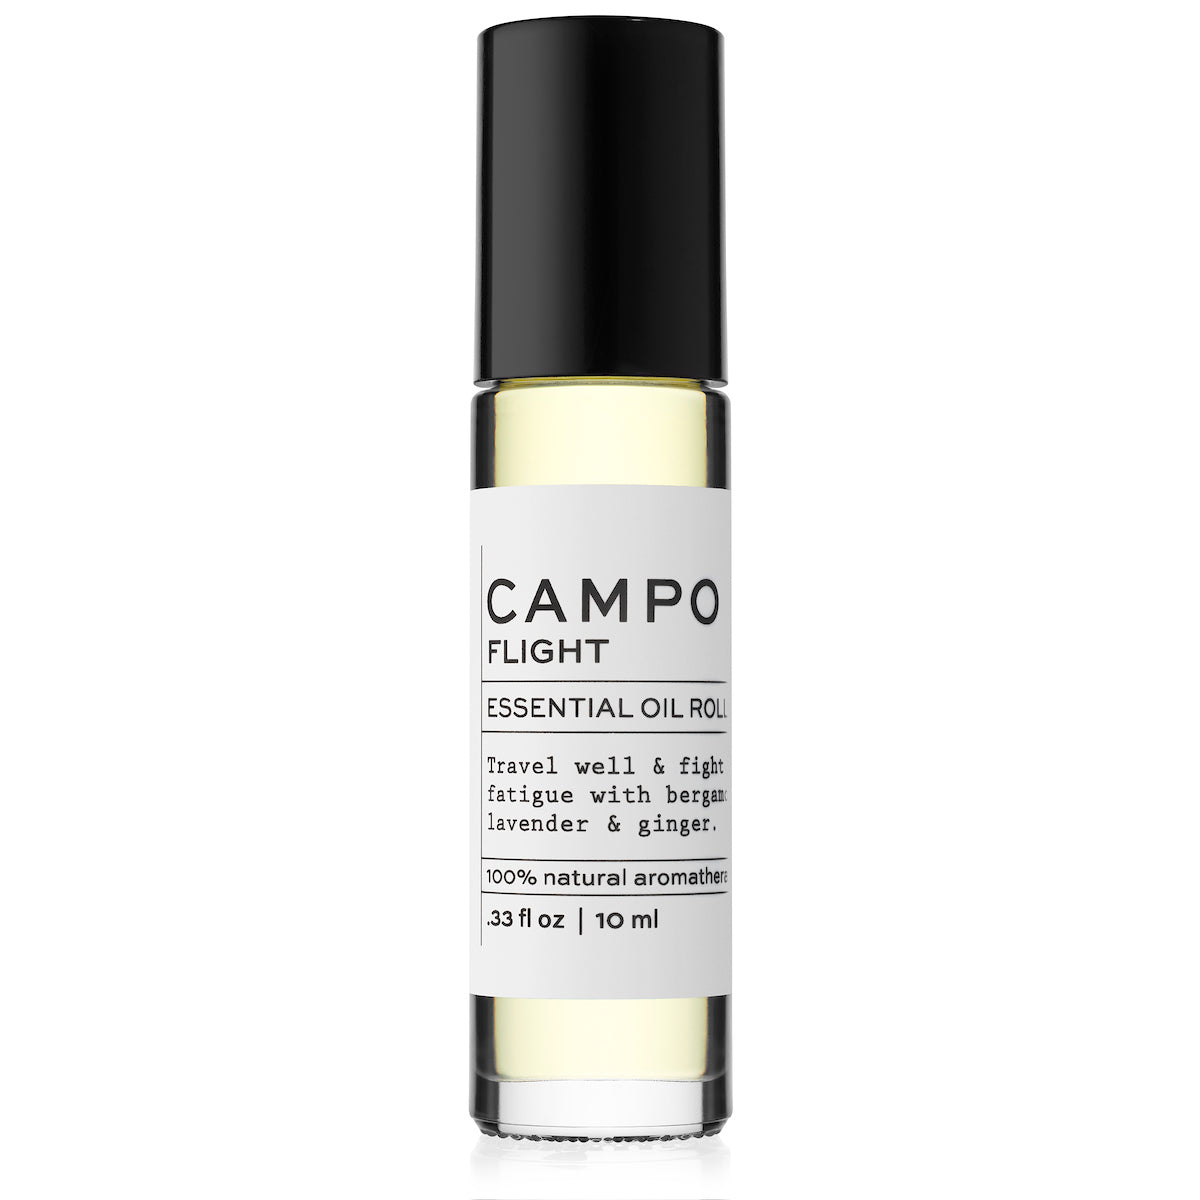 Campo Beauty Essential Oil FLIGHT Blend Roll-On that in 5 ml. Dispels feelings of stress during flight and restores a sense of vitality and alertness in any time zone. Feel grounded and connected to your mind and body with this 100% pure essential oil roll-on blend of Bergamot, Lavender, Peppermint & Ginger. Pre-blended with 100% natural beauty carrier oils, so it’s jet-set and ready to roll.